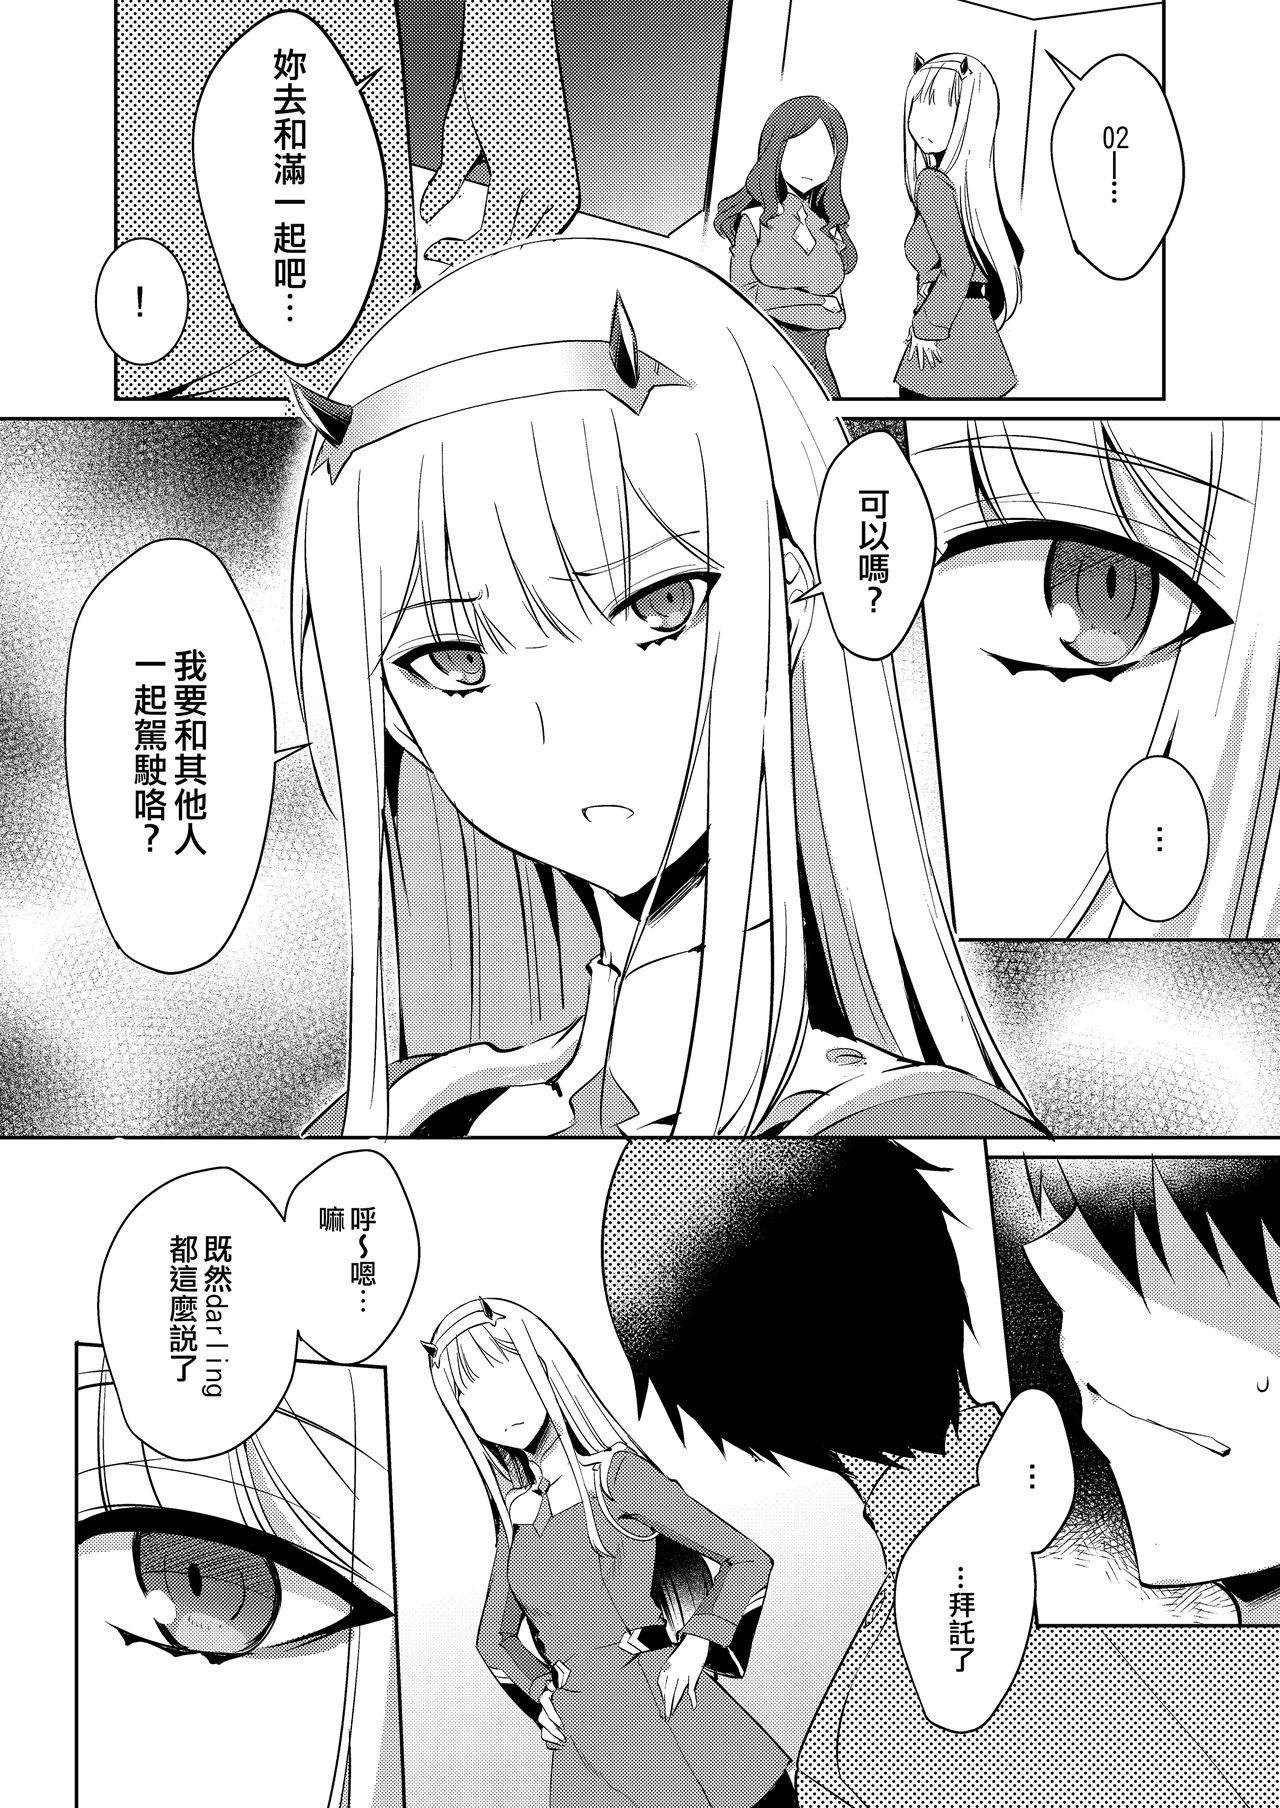 Fucked Mitsuru in the Zero Two - Darling in the franxx Woman Fucking - Page 5